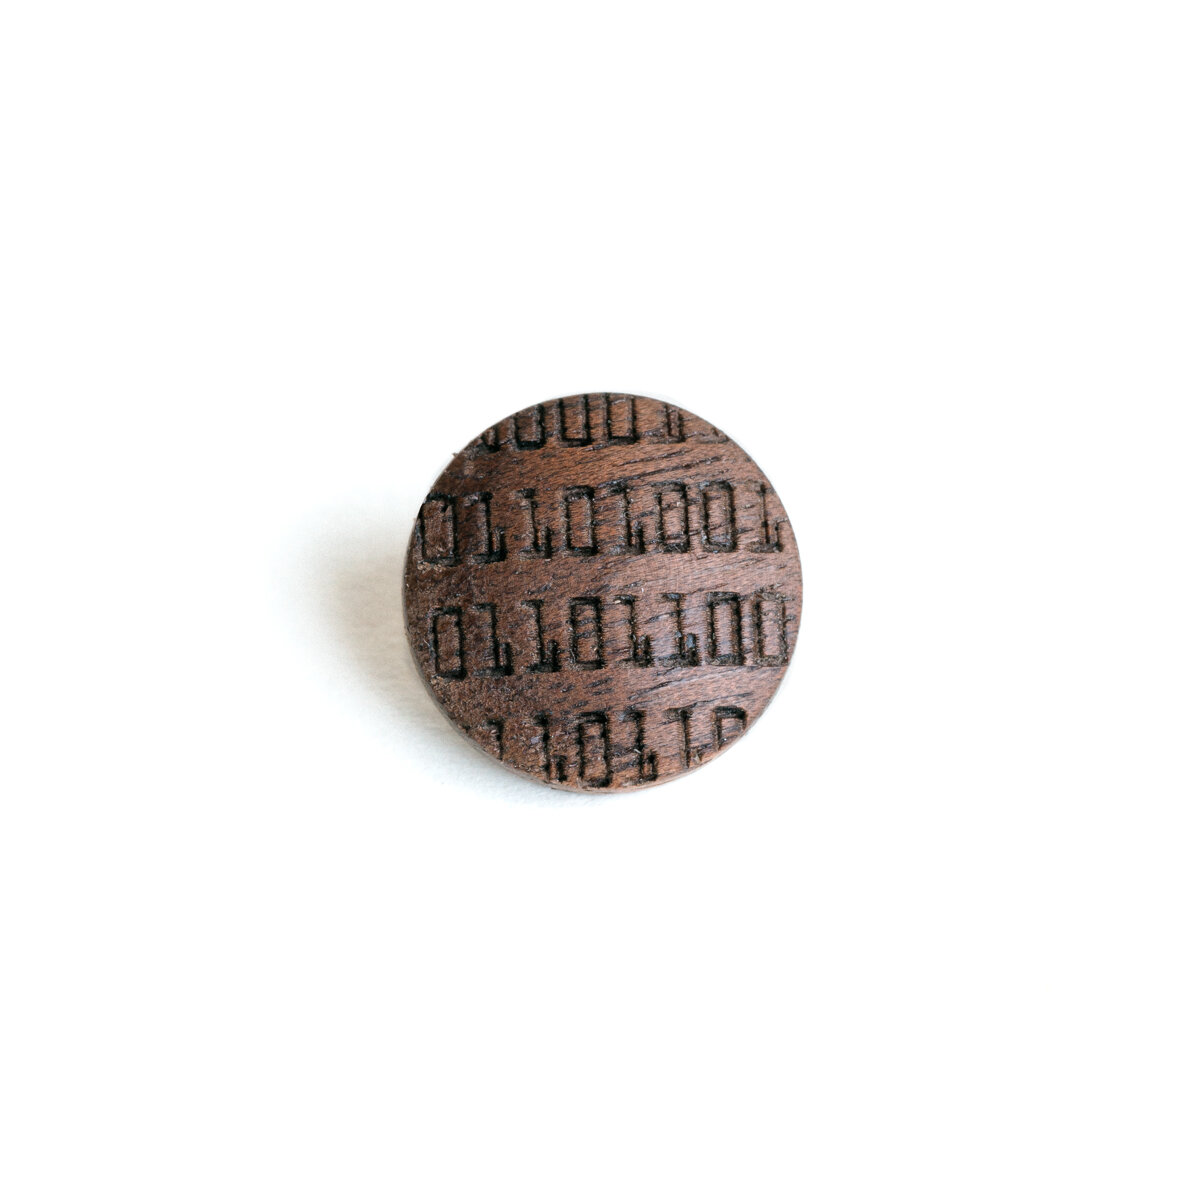 Wooden Walnut Binary Code Laser Engraved Soft Release Button for Cameras, Threaded REG